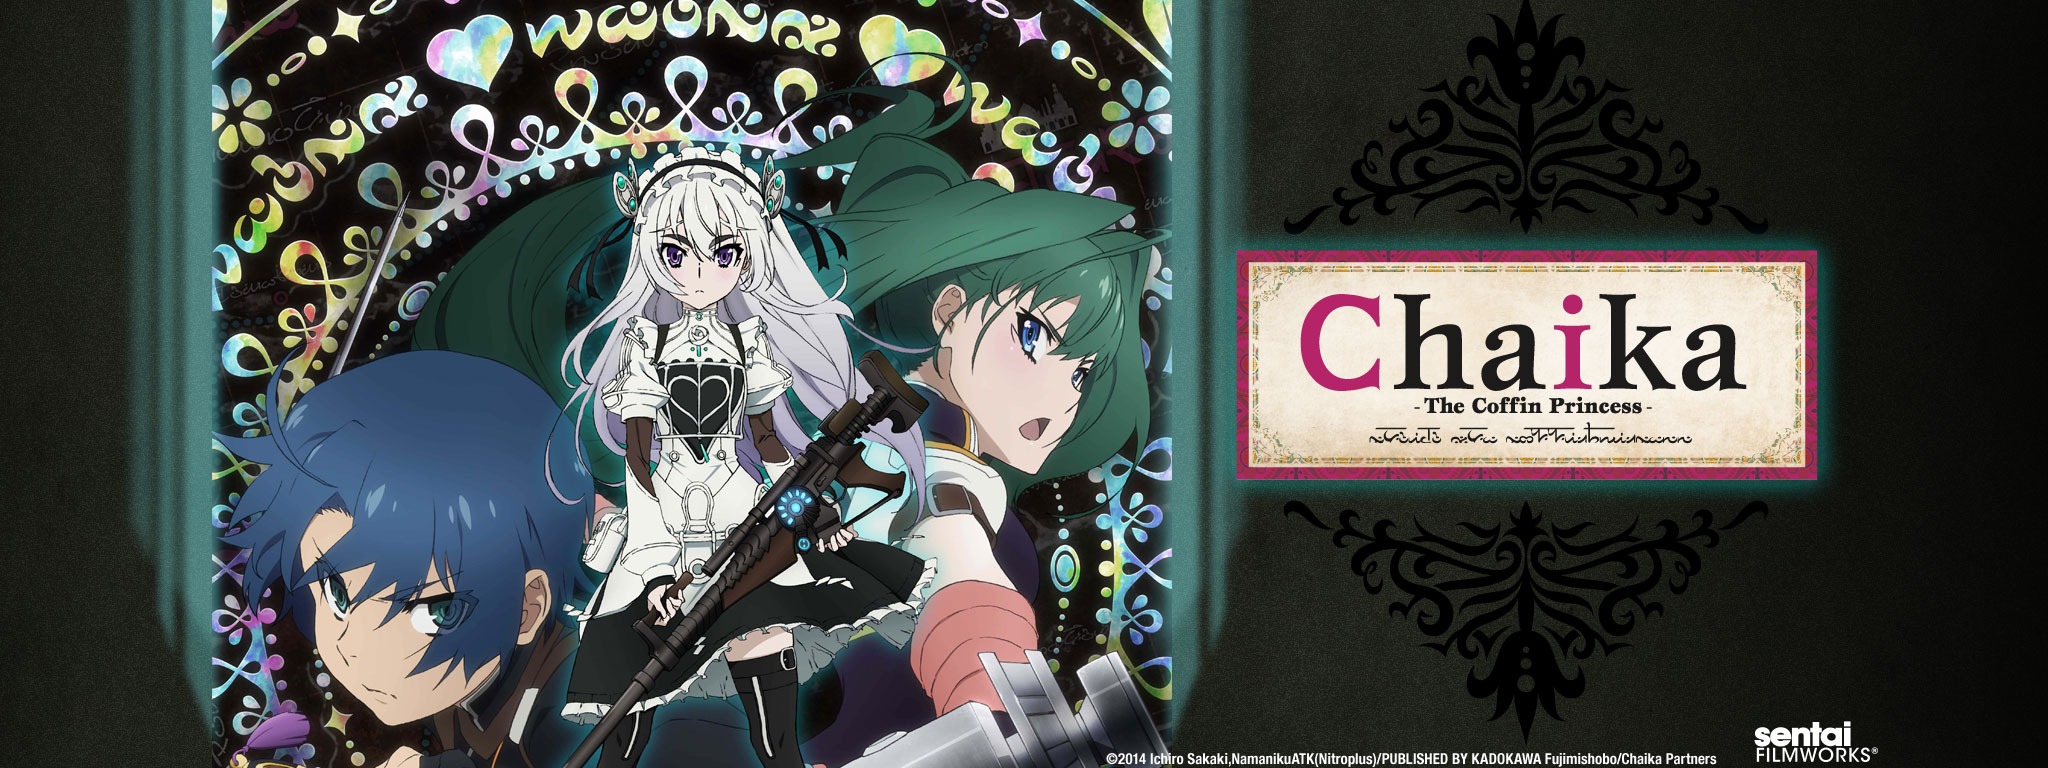 Title Art for Chaika the Coffin Princess